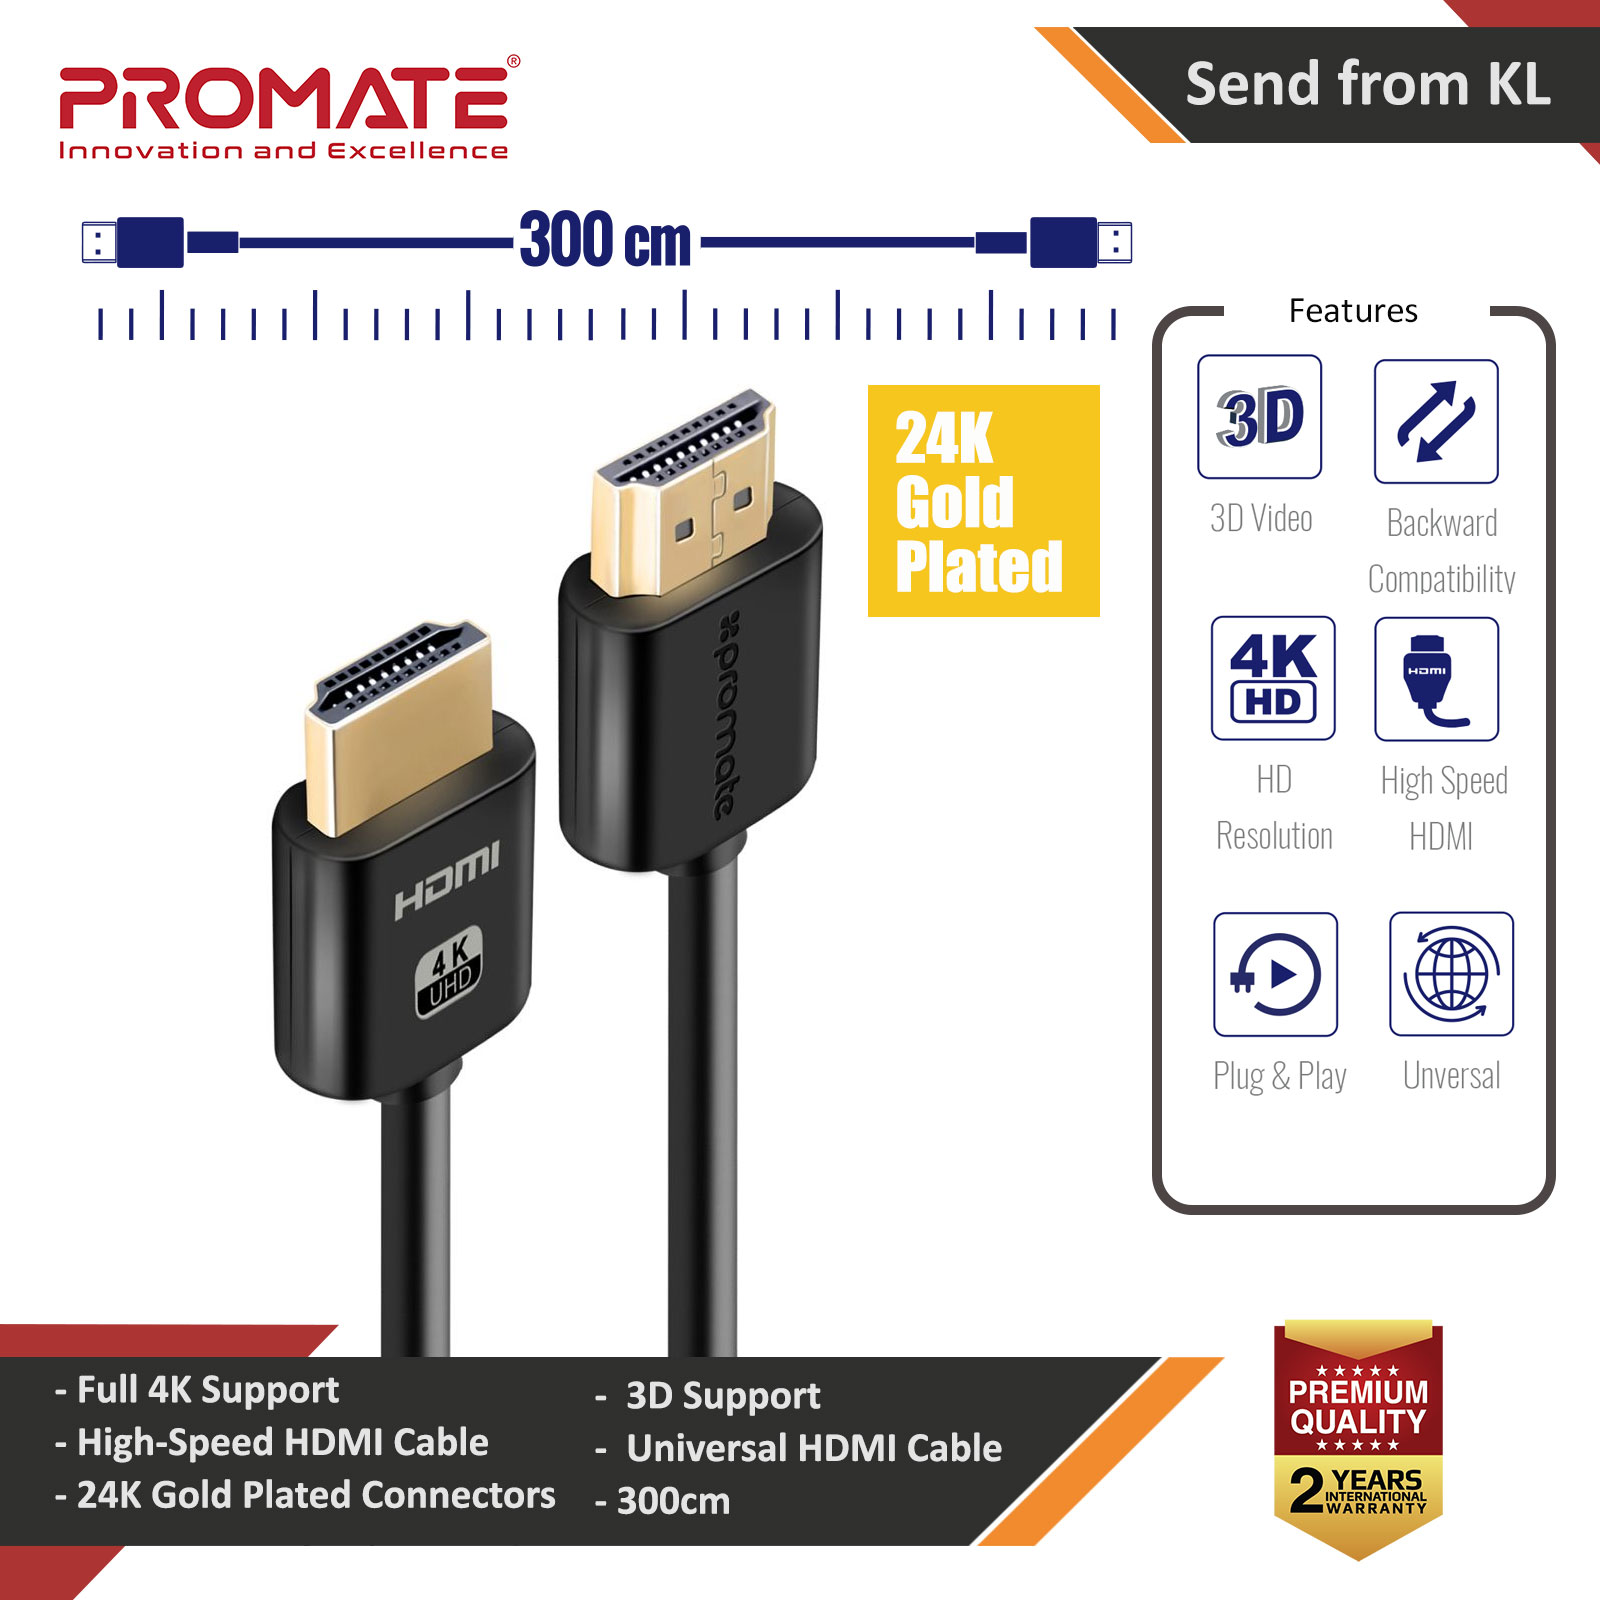 Picture of Promate 4K HDMI Cable High-Speed 3 Meter HDMI Cable with 24K Gold Plated Connector and Ethernet 3D Video Support for HDTV Projectors Computers LED TV and Game consoles 300cm ProLink4K2-300 Red Design- Red Design Cases, Red Design Covers, iPad Cases and a wide selection of Red Design Accessories in Malaysia, Sabah, Sarawak and Singapore 